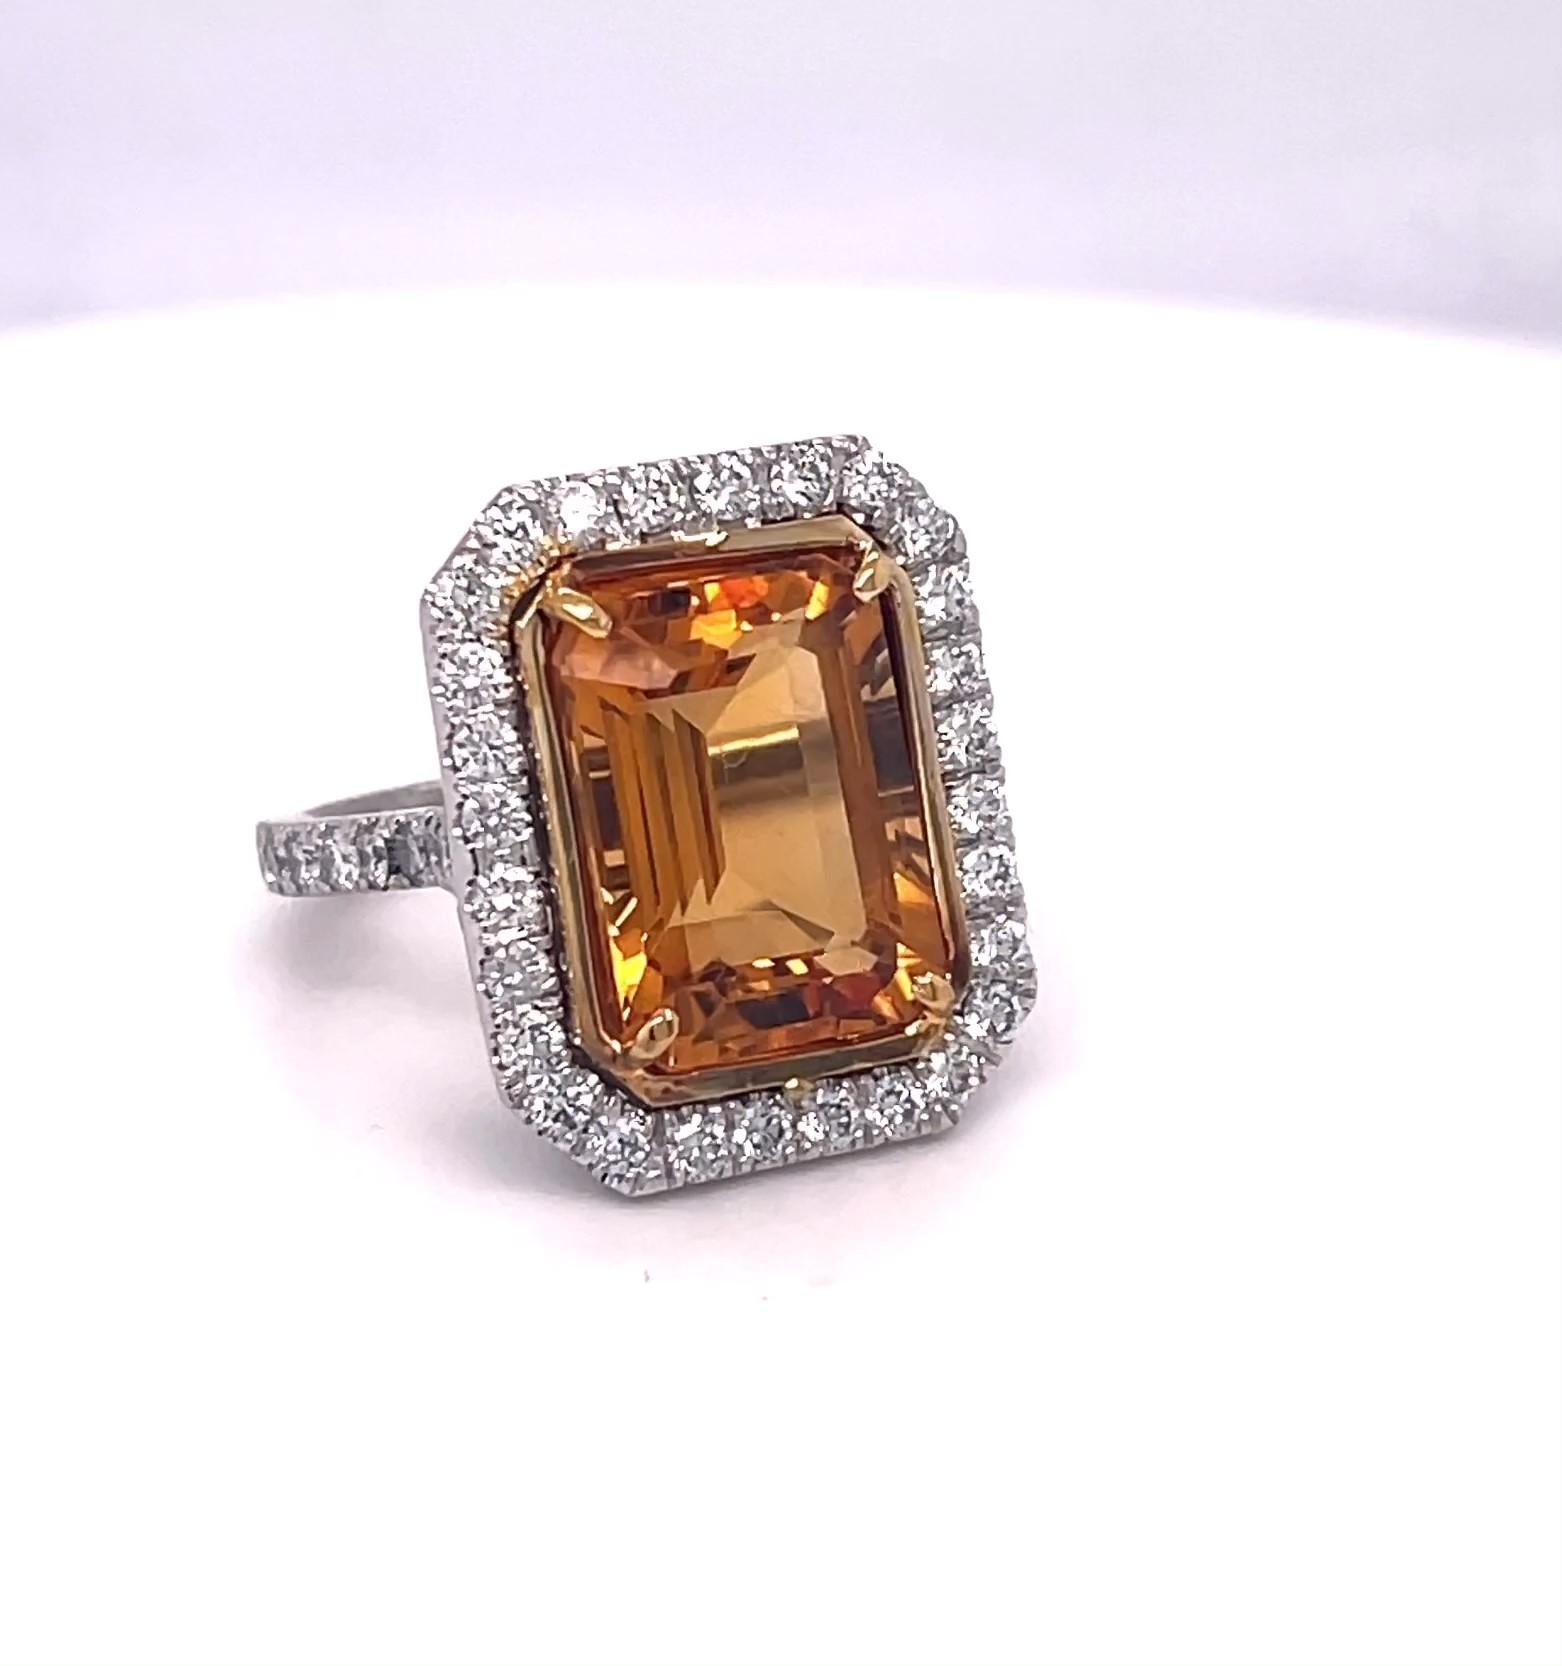 Contemporary Emerald Cut Citrine and Diamond 7.71 Carats Ring, Platinum / 18KYG For Sale